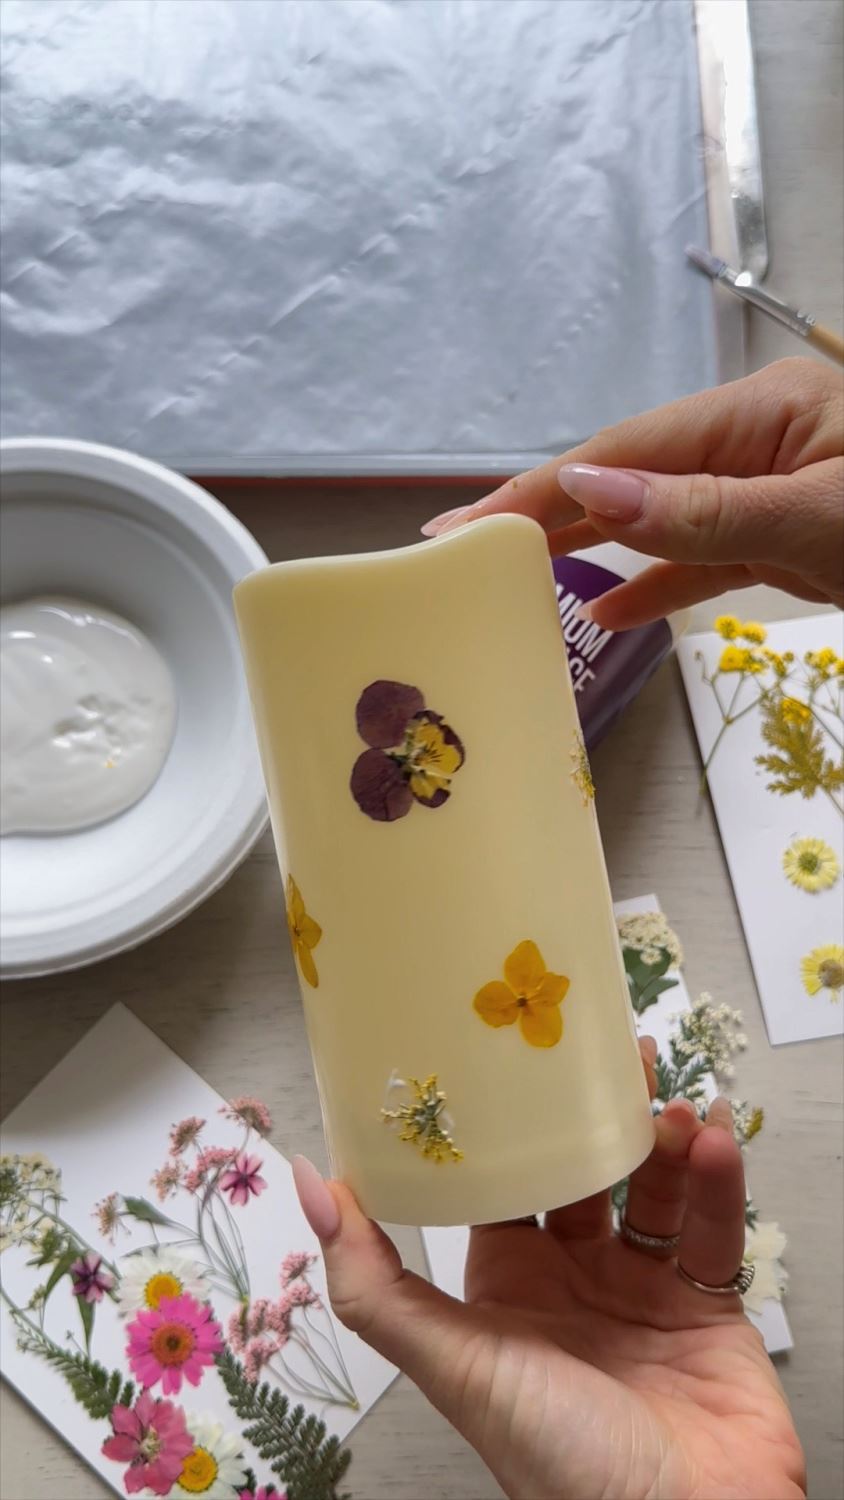 Step 4 Continue adding flowers to candle